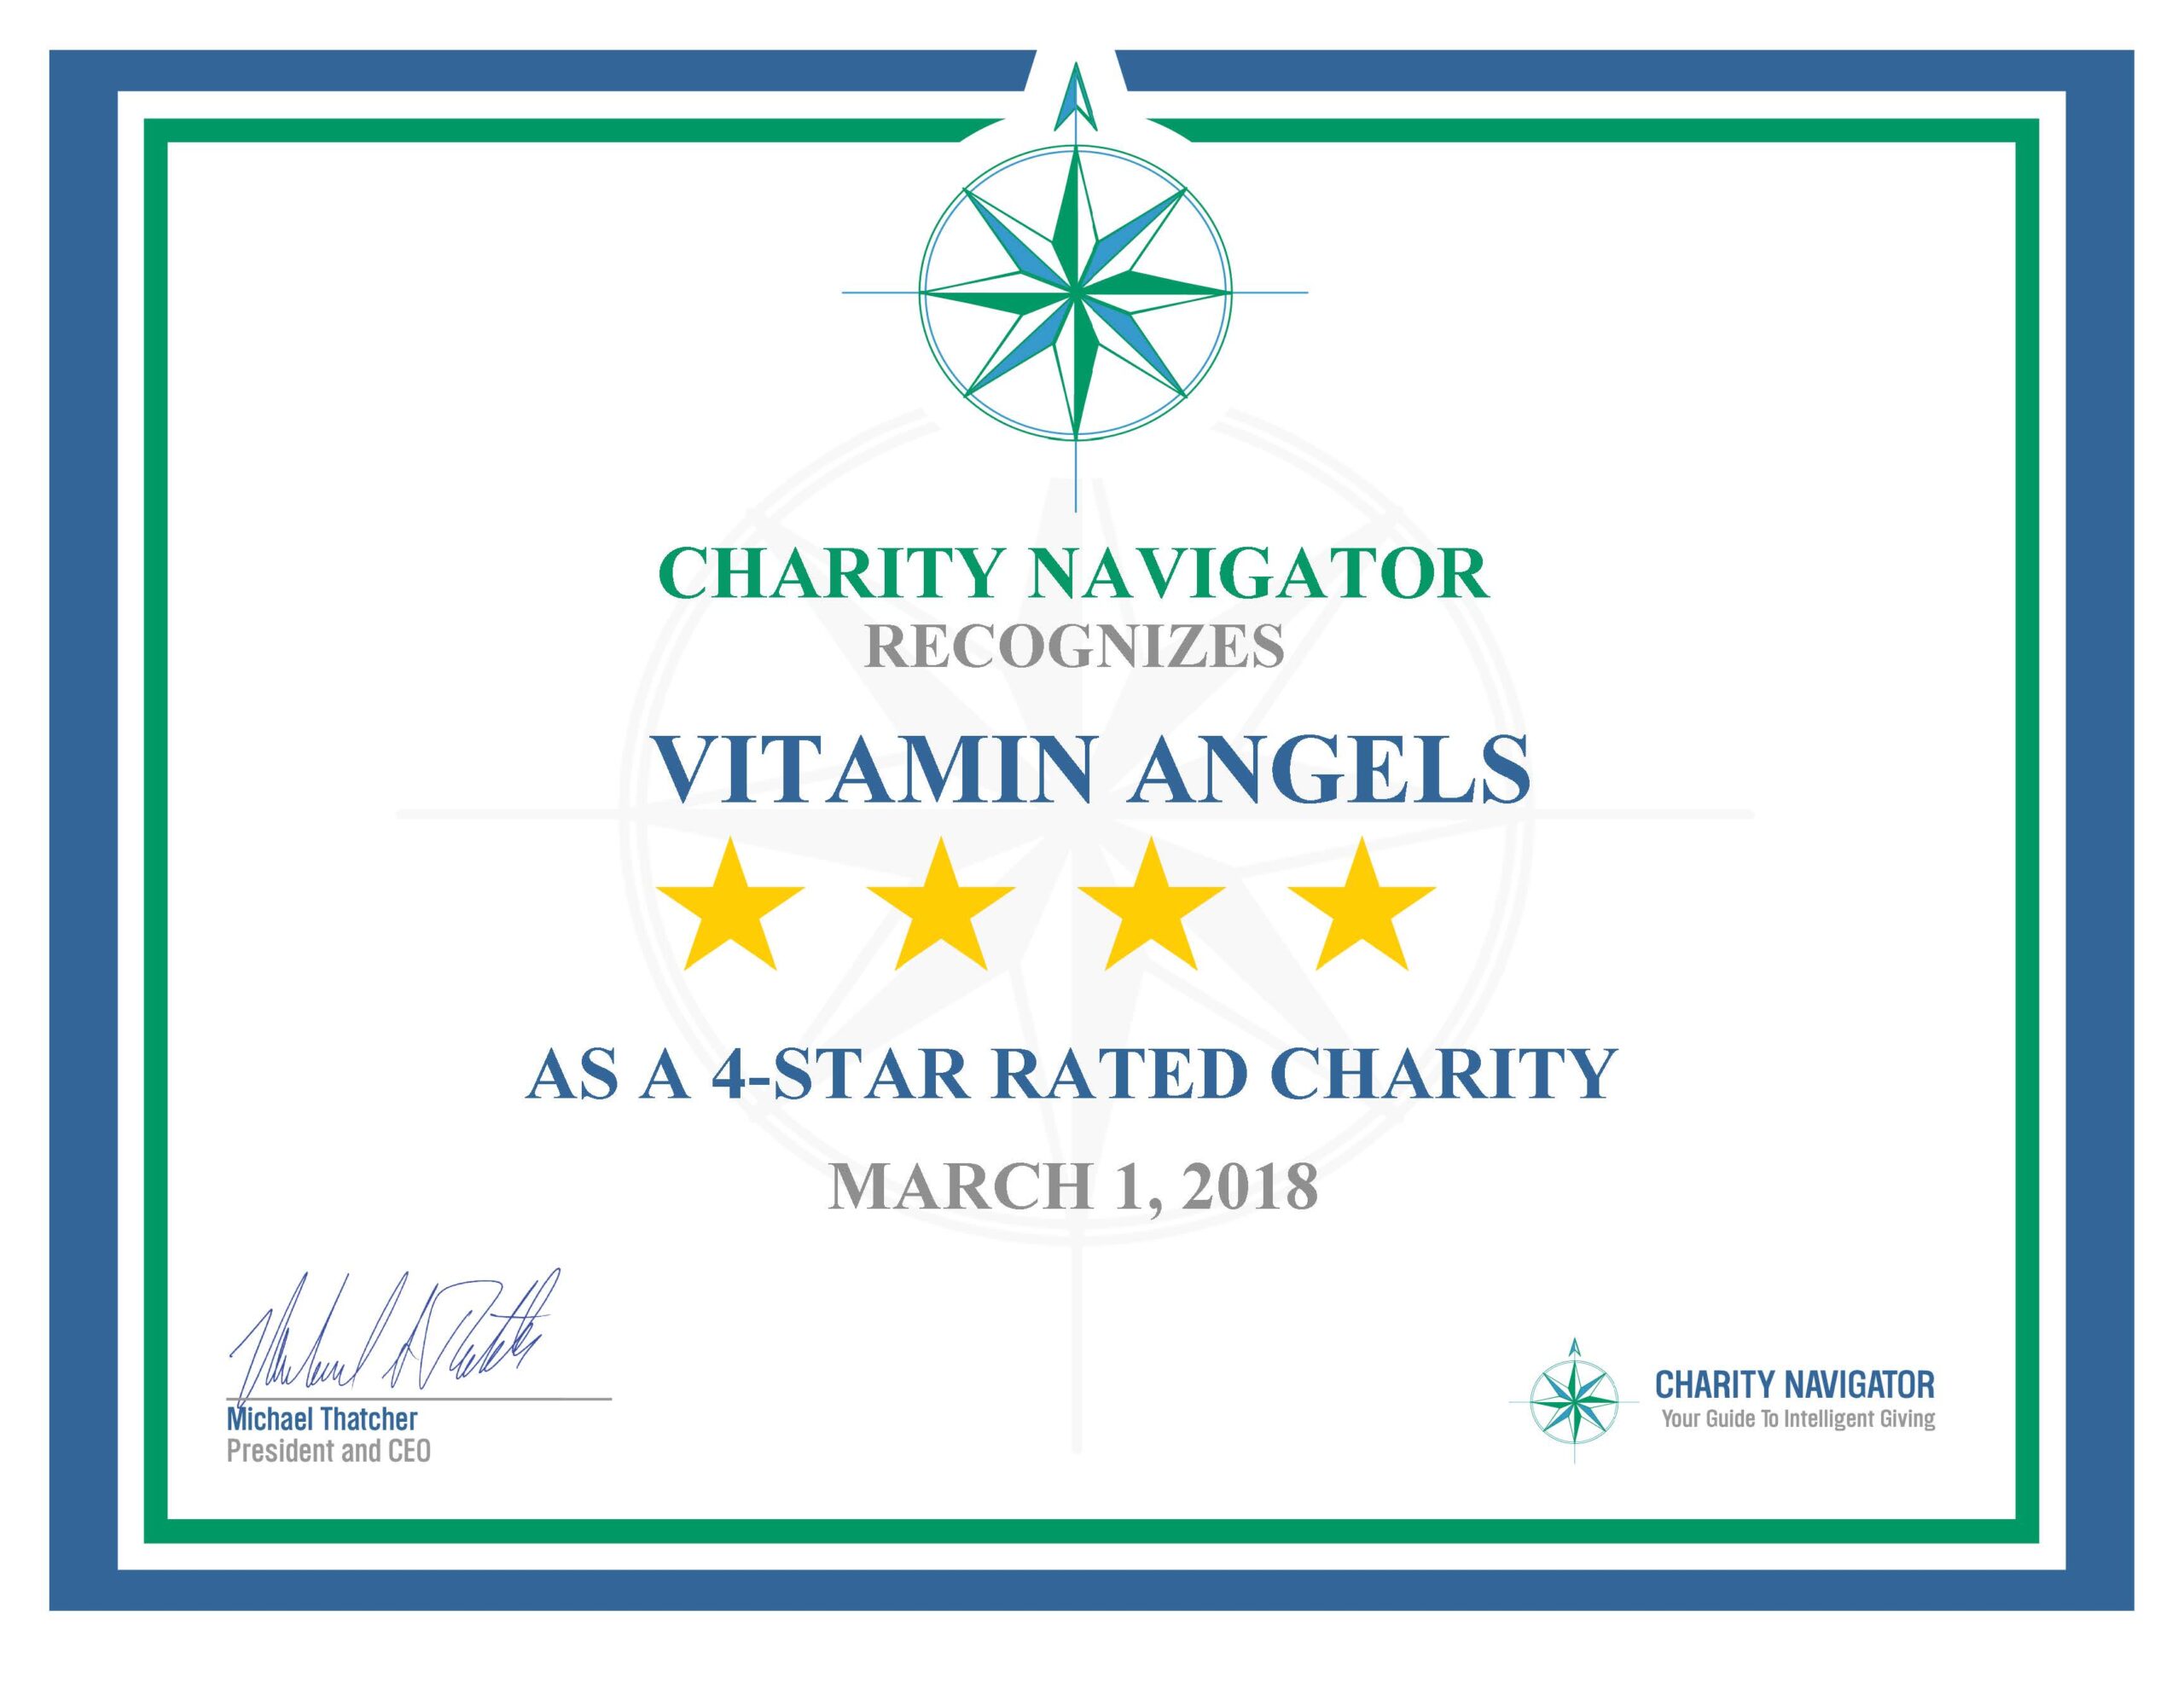 Vitamin Angels Outperforms Nearly 9,000 Charities Evaluated by Charity Navigator